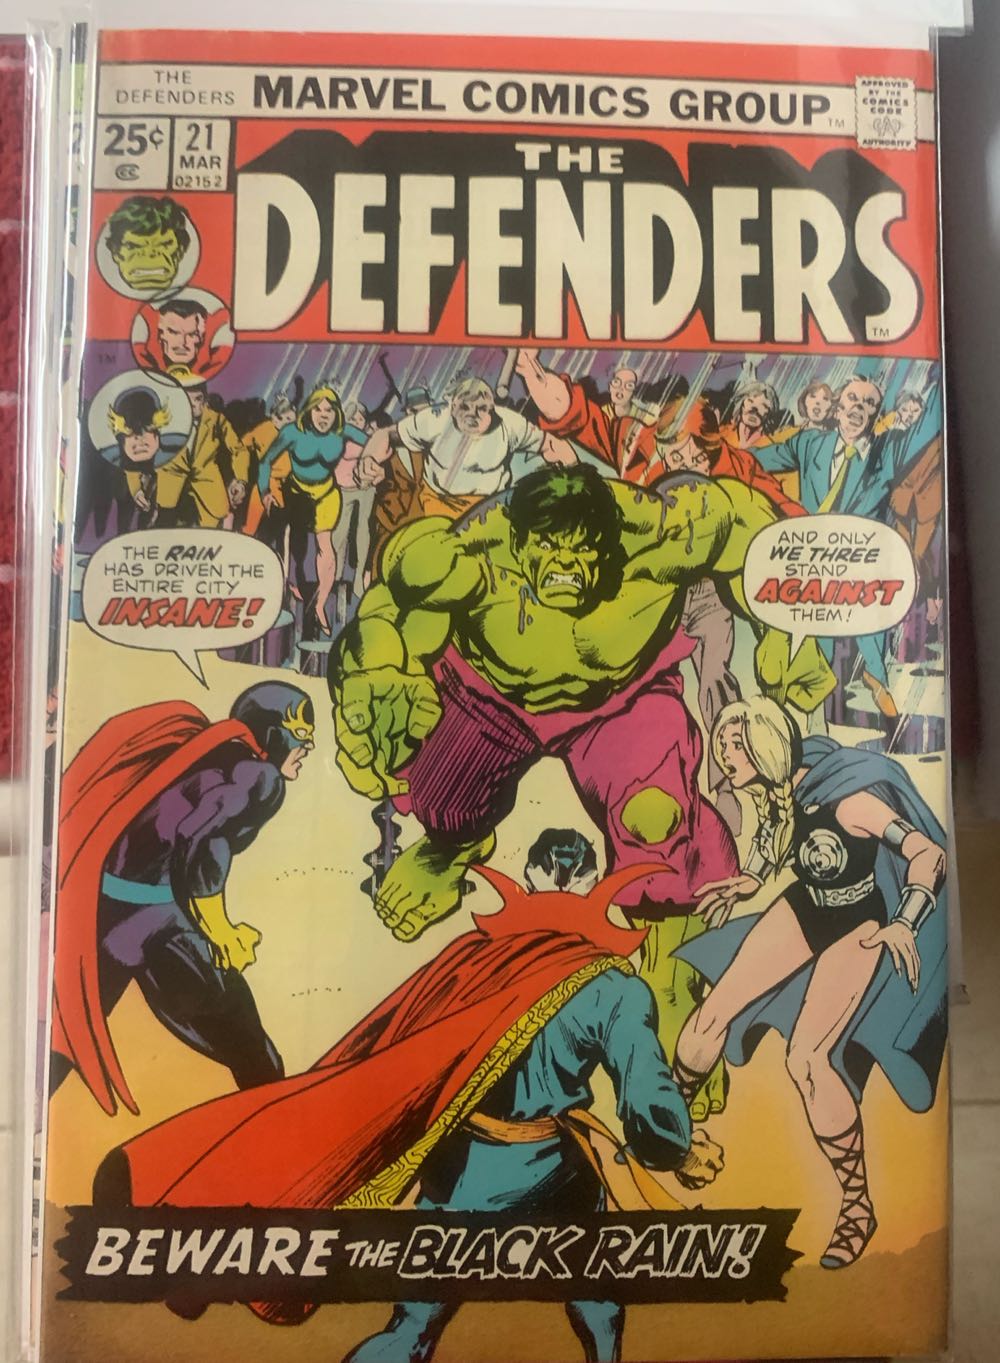 The Defenders - Marvel (21 - Mar 1975) comic book collectible - Main Image 3